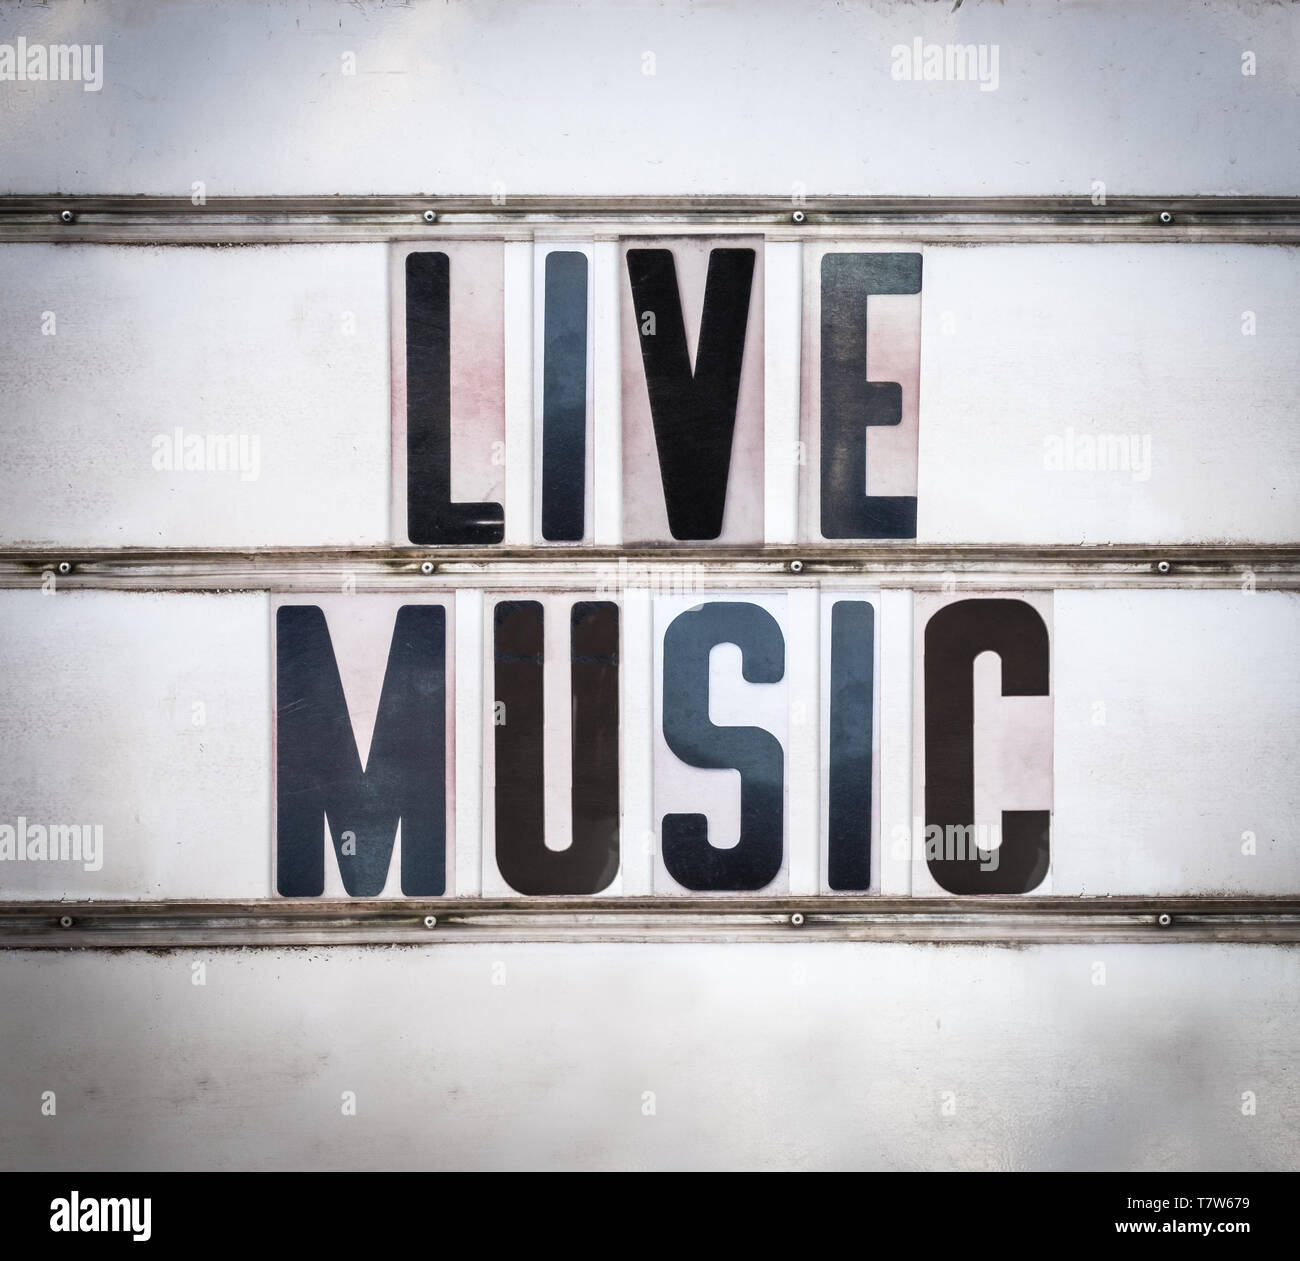 A Retro Vintage And Grungy Live Music Sign Outside A Bar Or Pub Or Nightclub Stock Photo